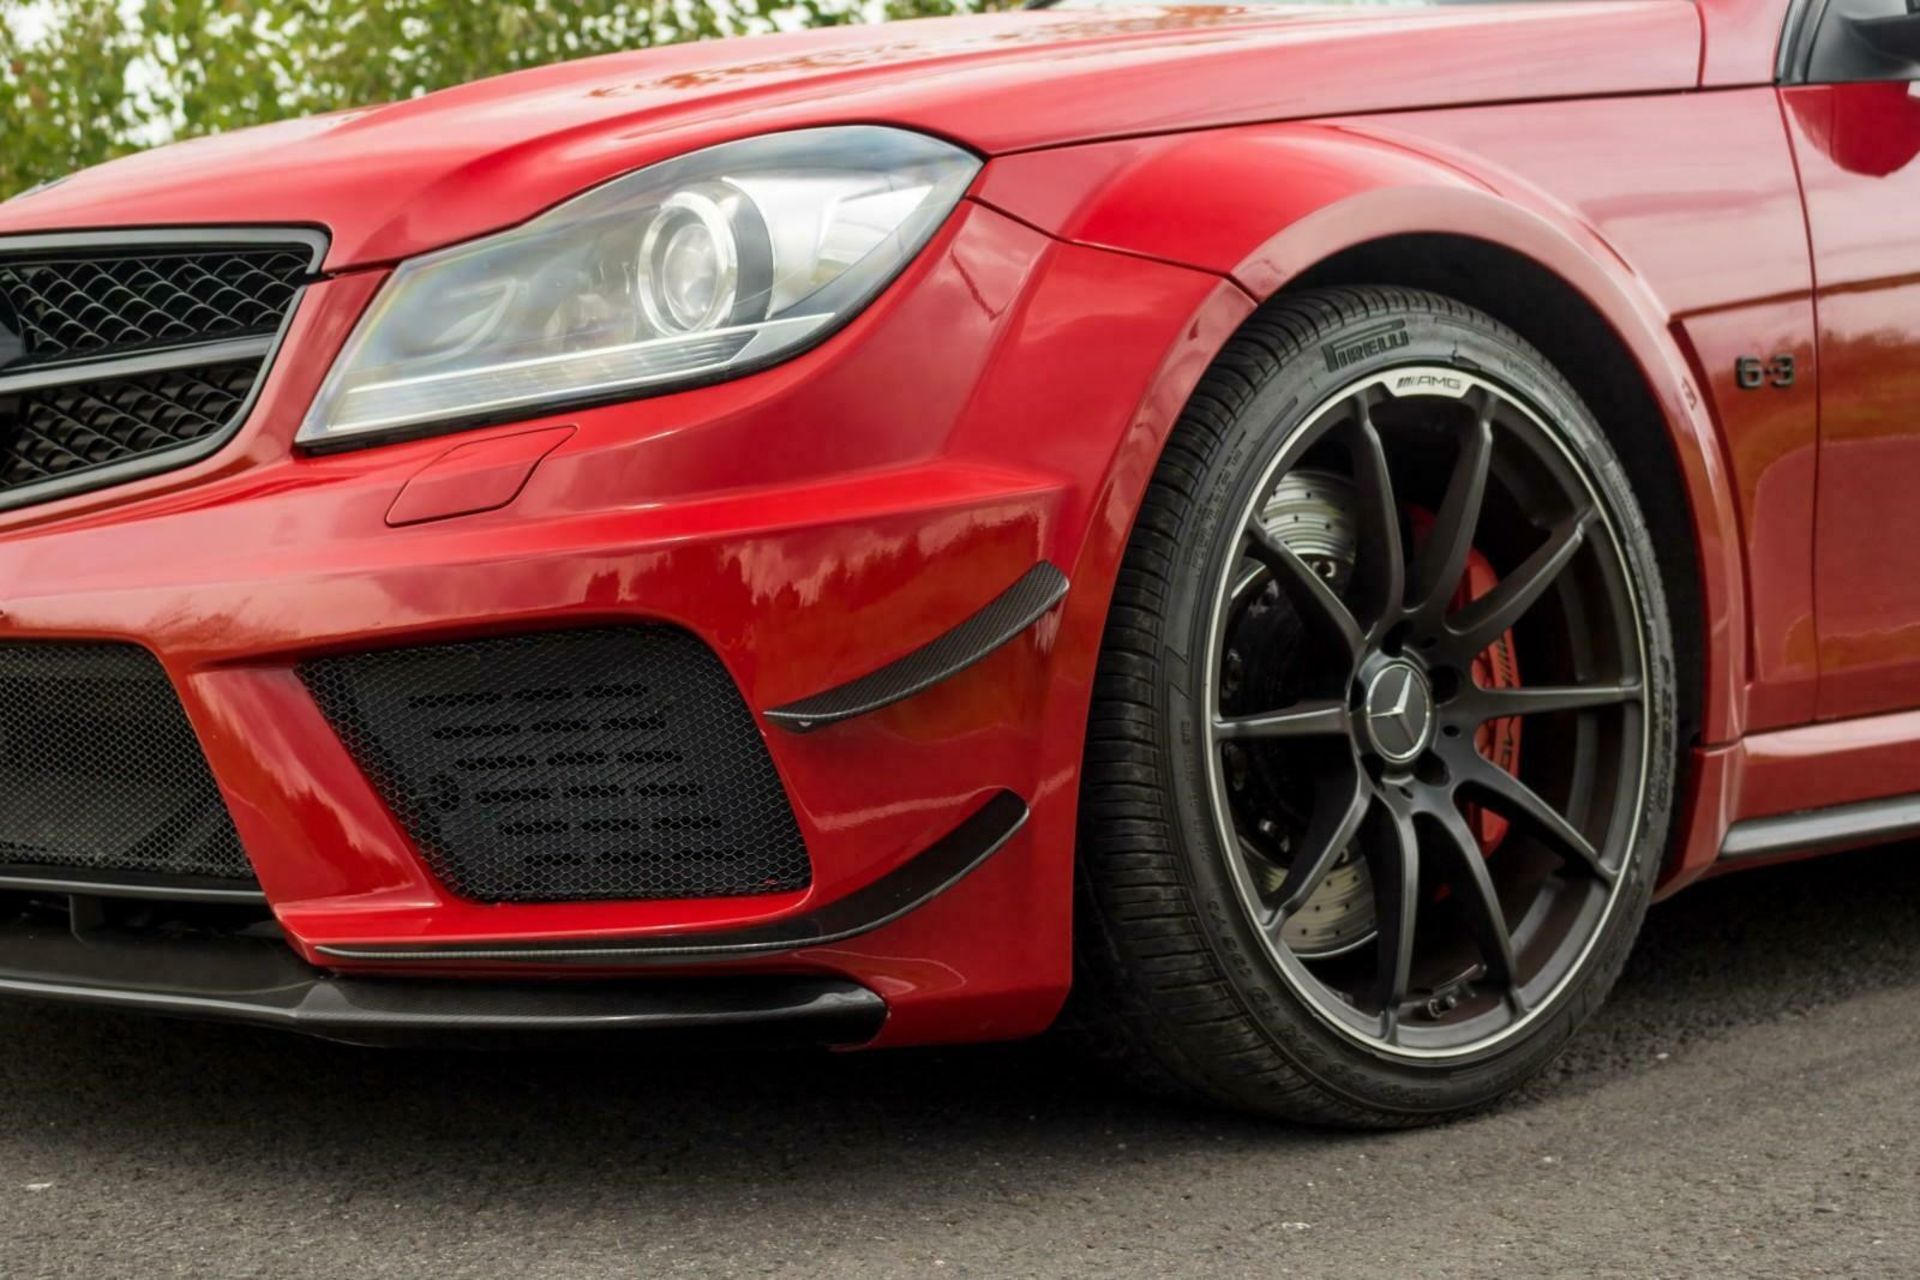 MERCEDES-BENZ C63 AMG BLACK SERIES (1 OF 600 MADE) - Image 6 of 12